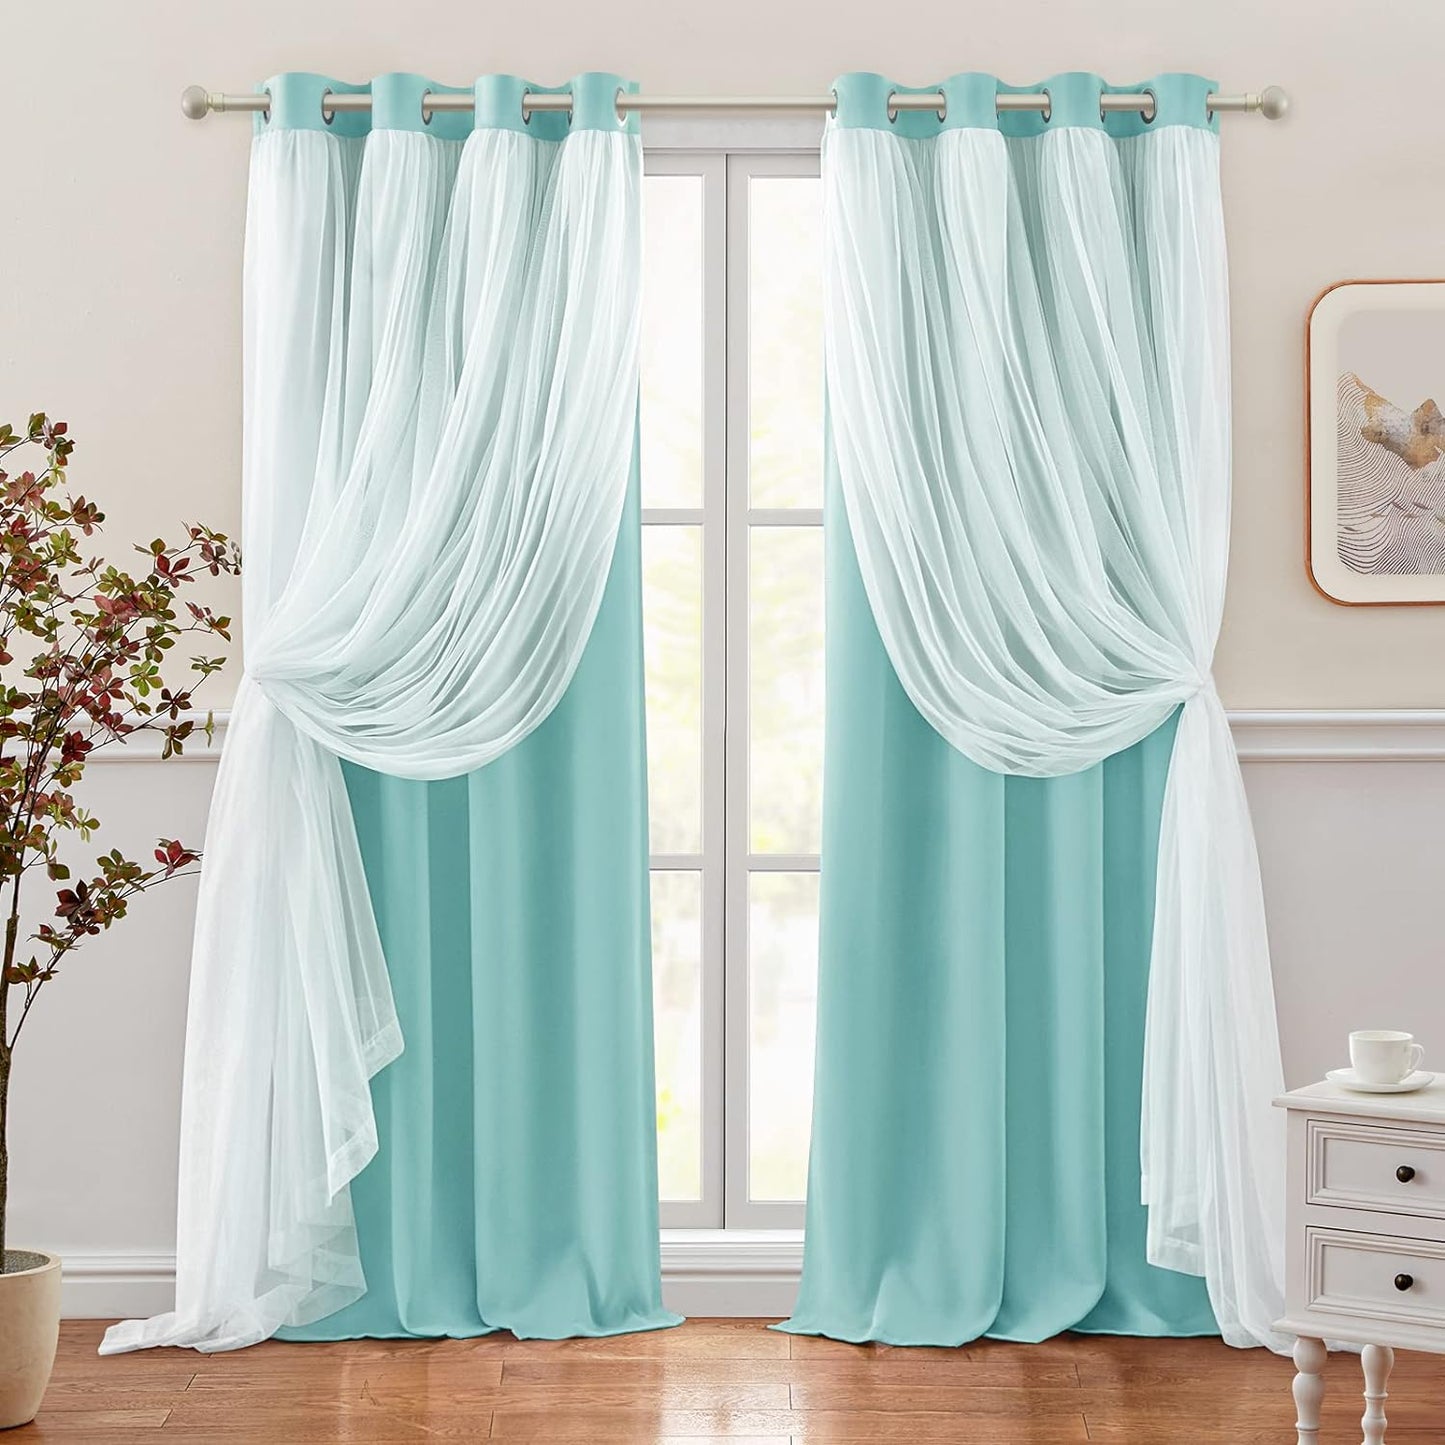 HOMEIDEAS Double Layer Curtains Light Grey Blackout Curtains 84 Inch Length 2 Panels Nursery Curtains for Girls Kids Bedroom Grommet Blackout Curtains with Sheer Overlay  HOMEIDEAS Aqua 52" X 96" 